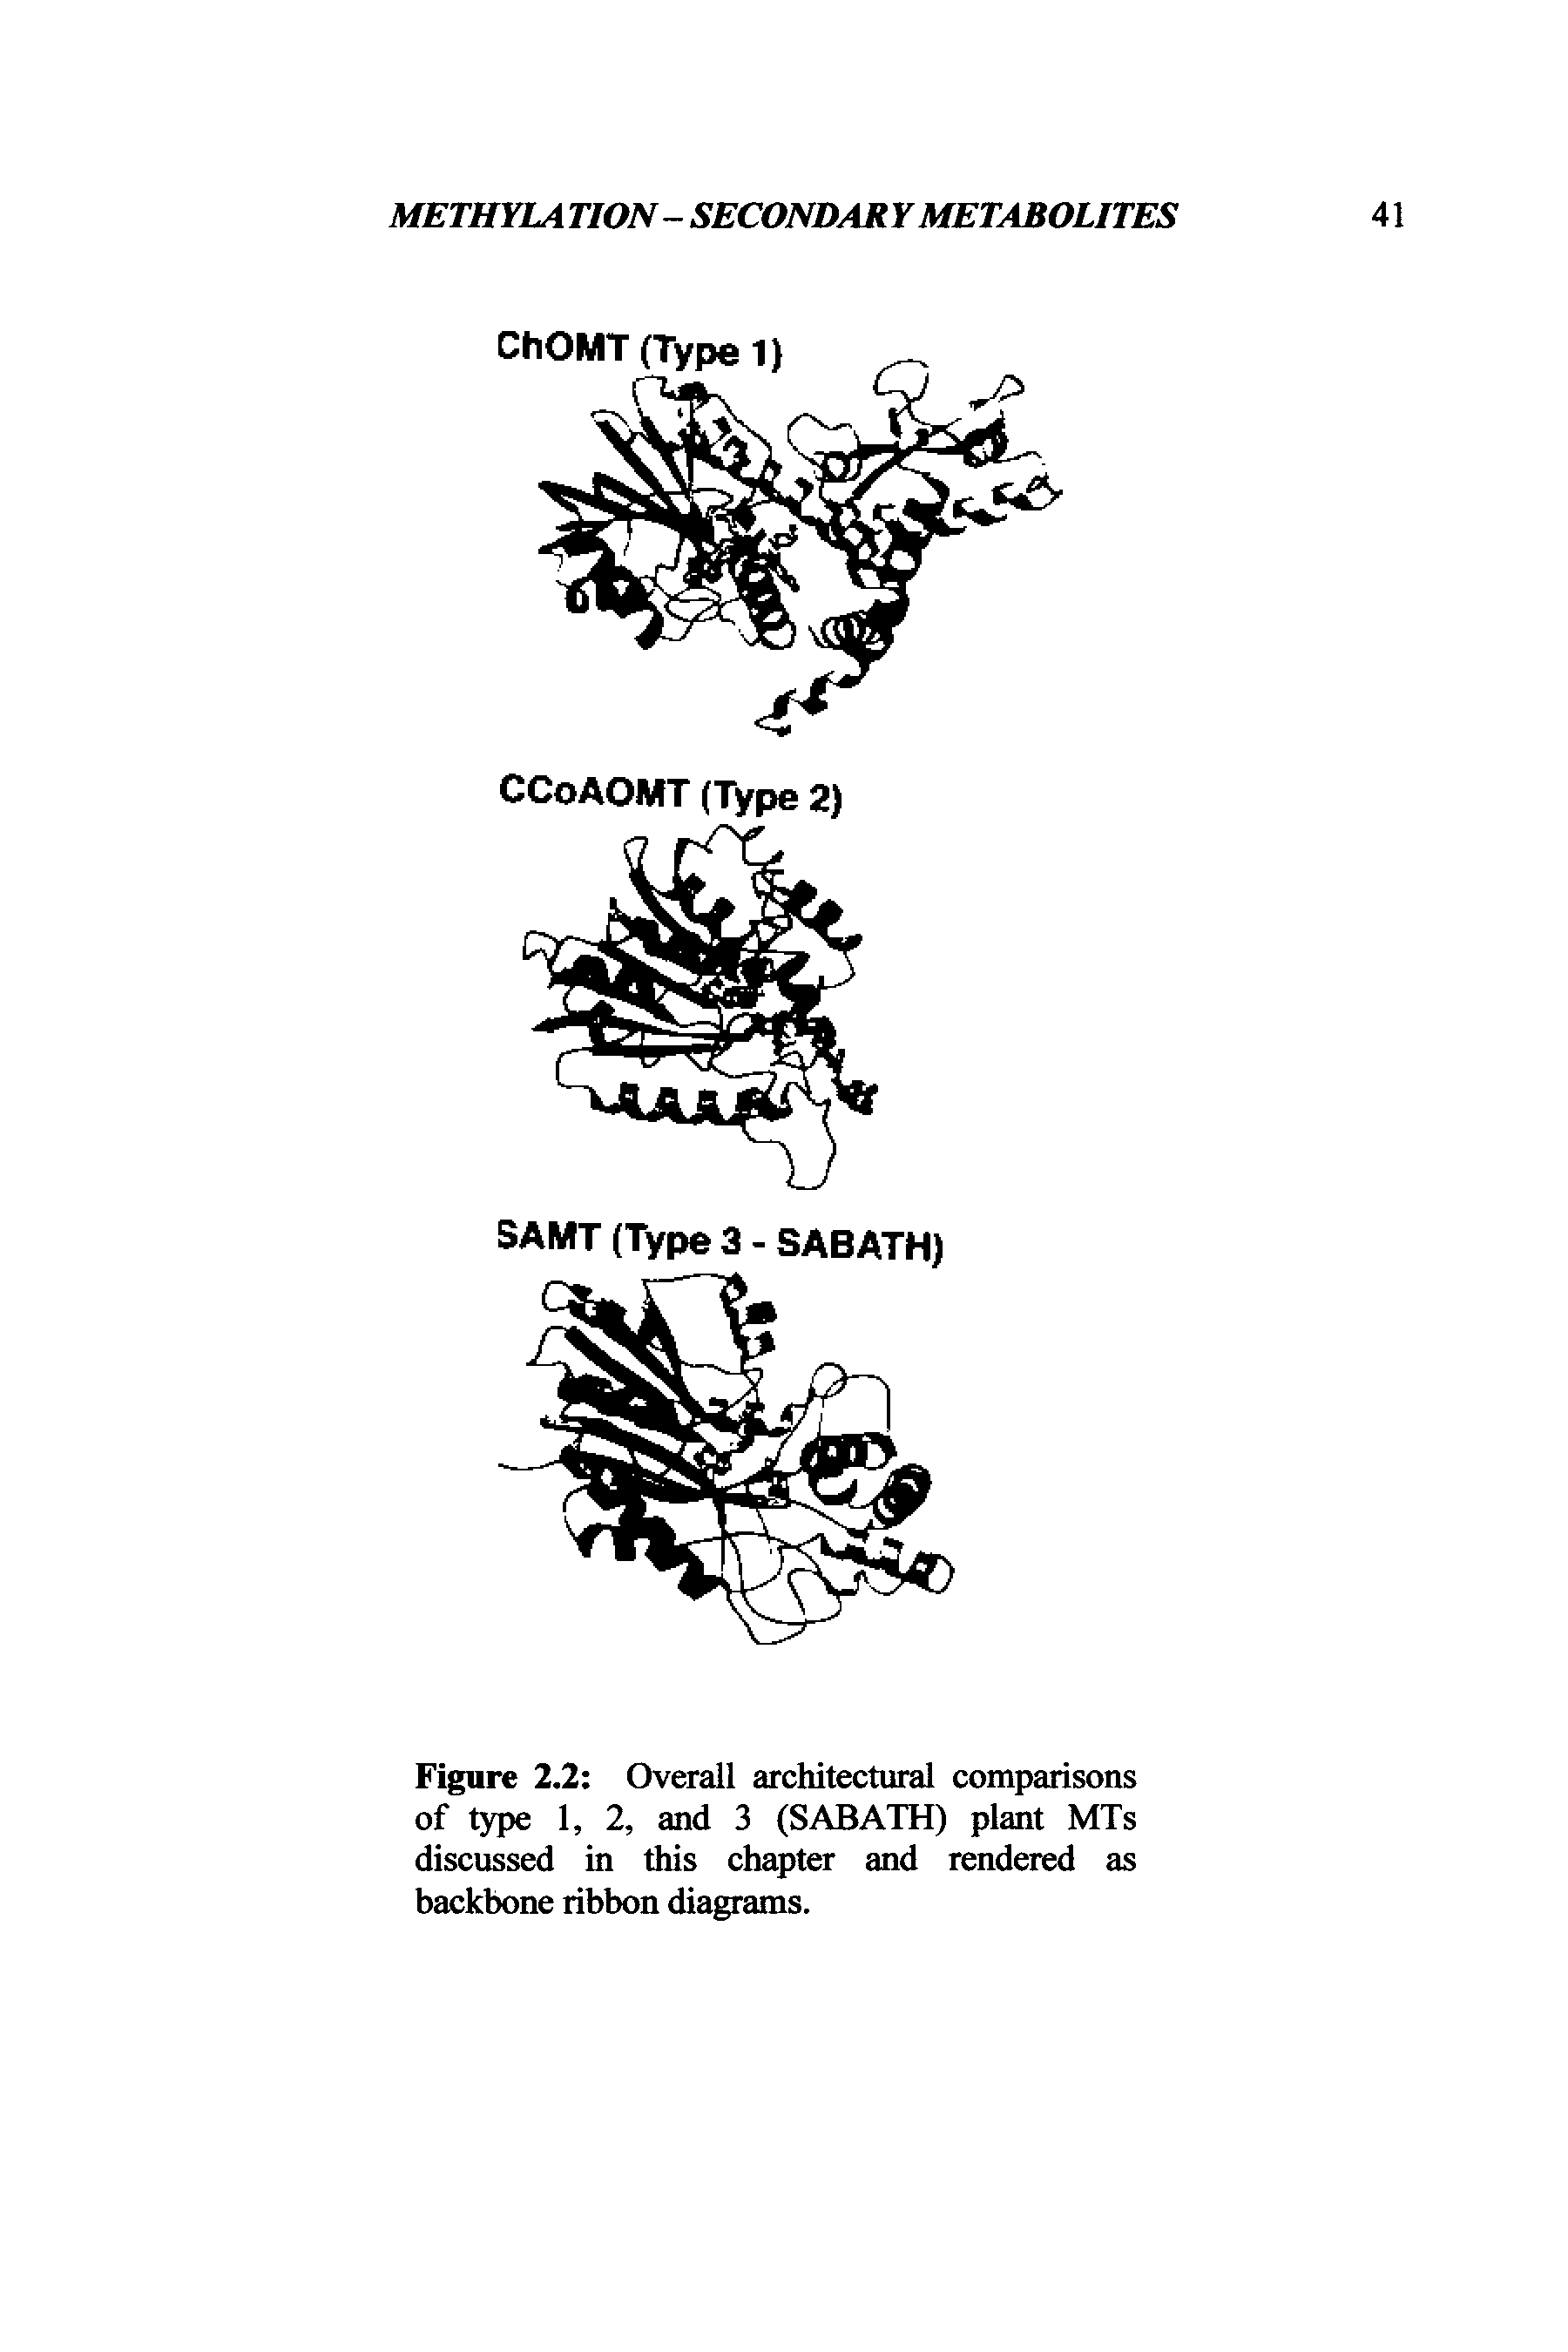 Figure 2.2 Overall architectural comparisons of type 1, 2, and 3 (SABATH) plant MTs discussed in this chapter and rendered as backbone ribbon diagrams.